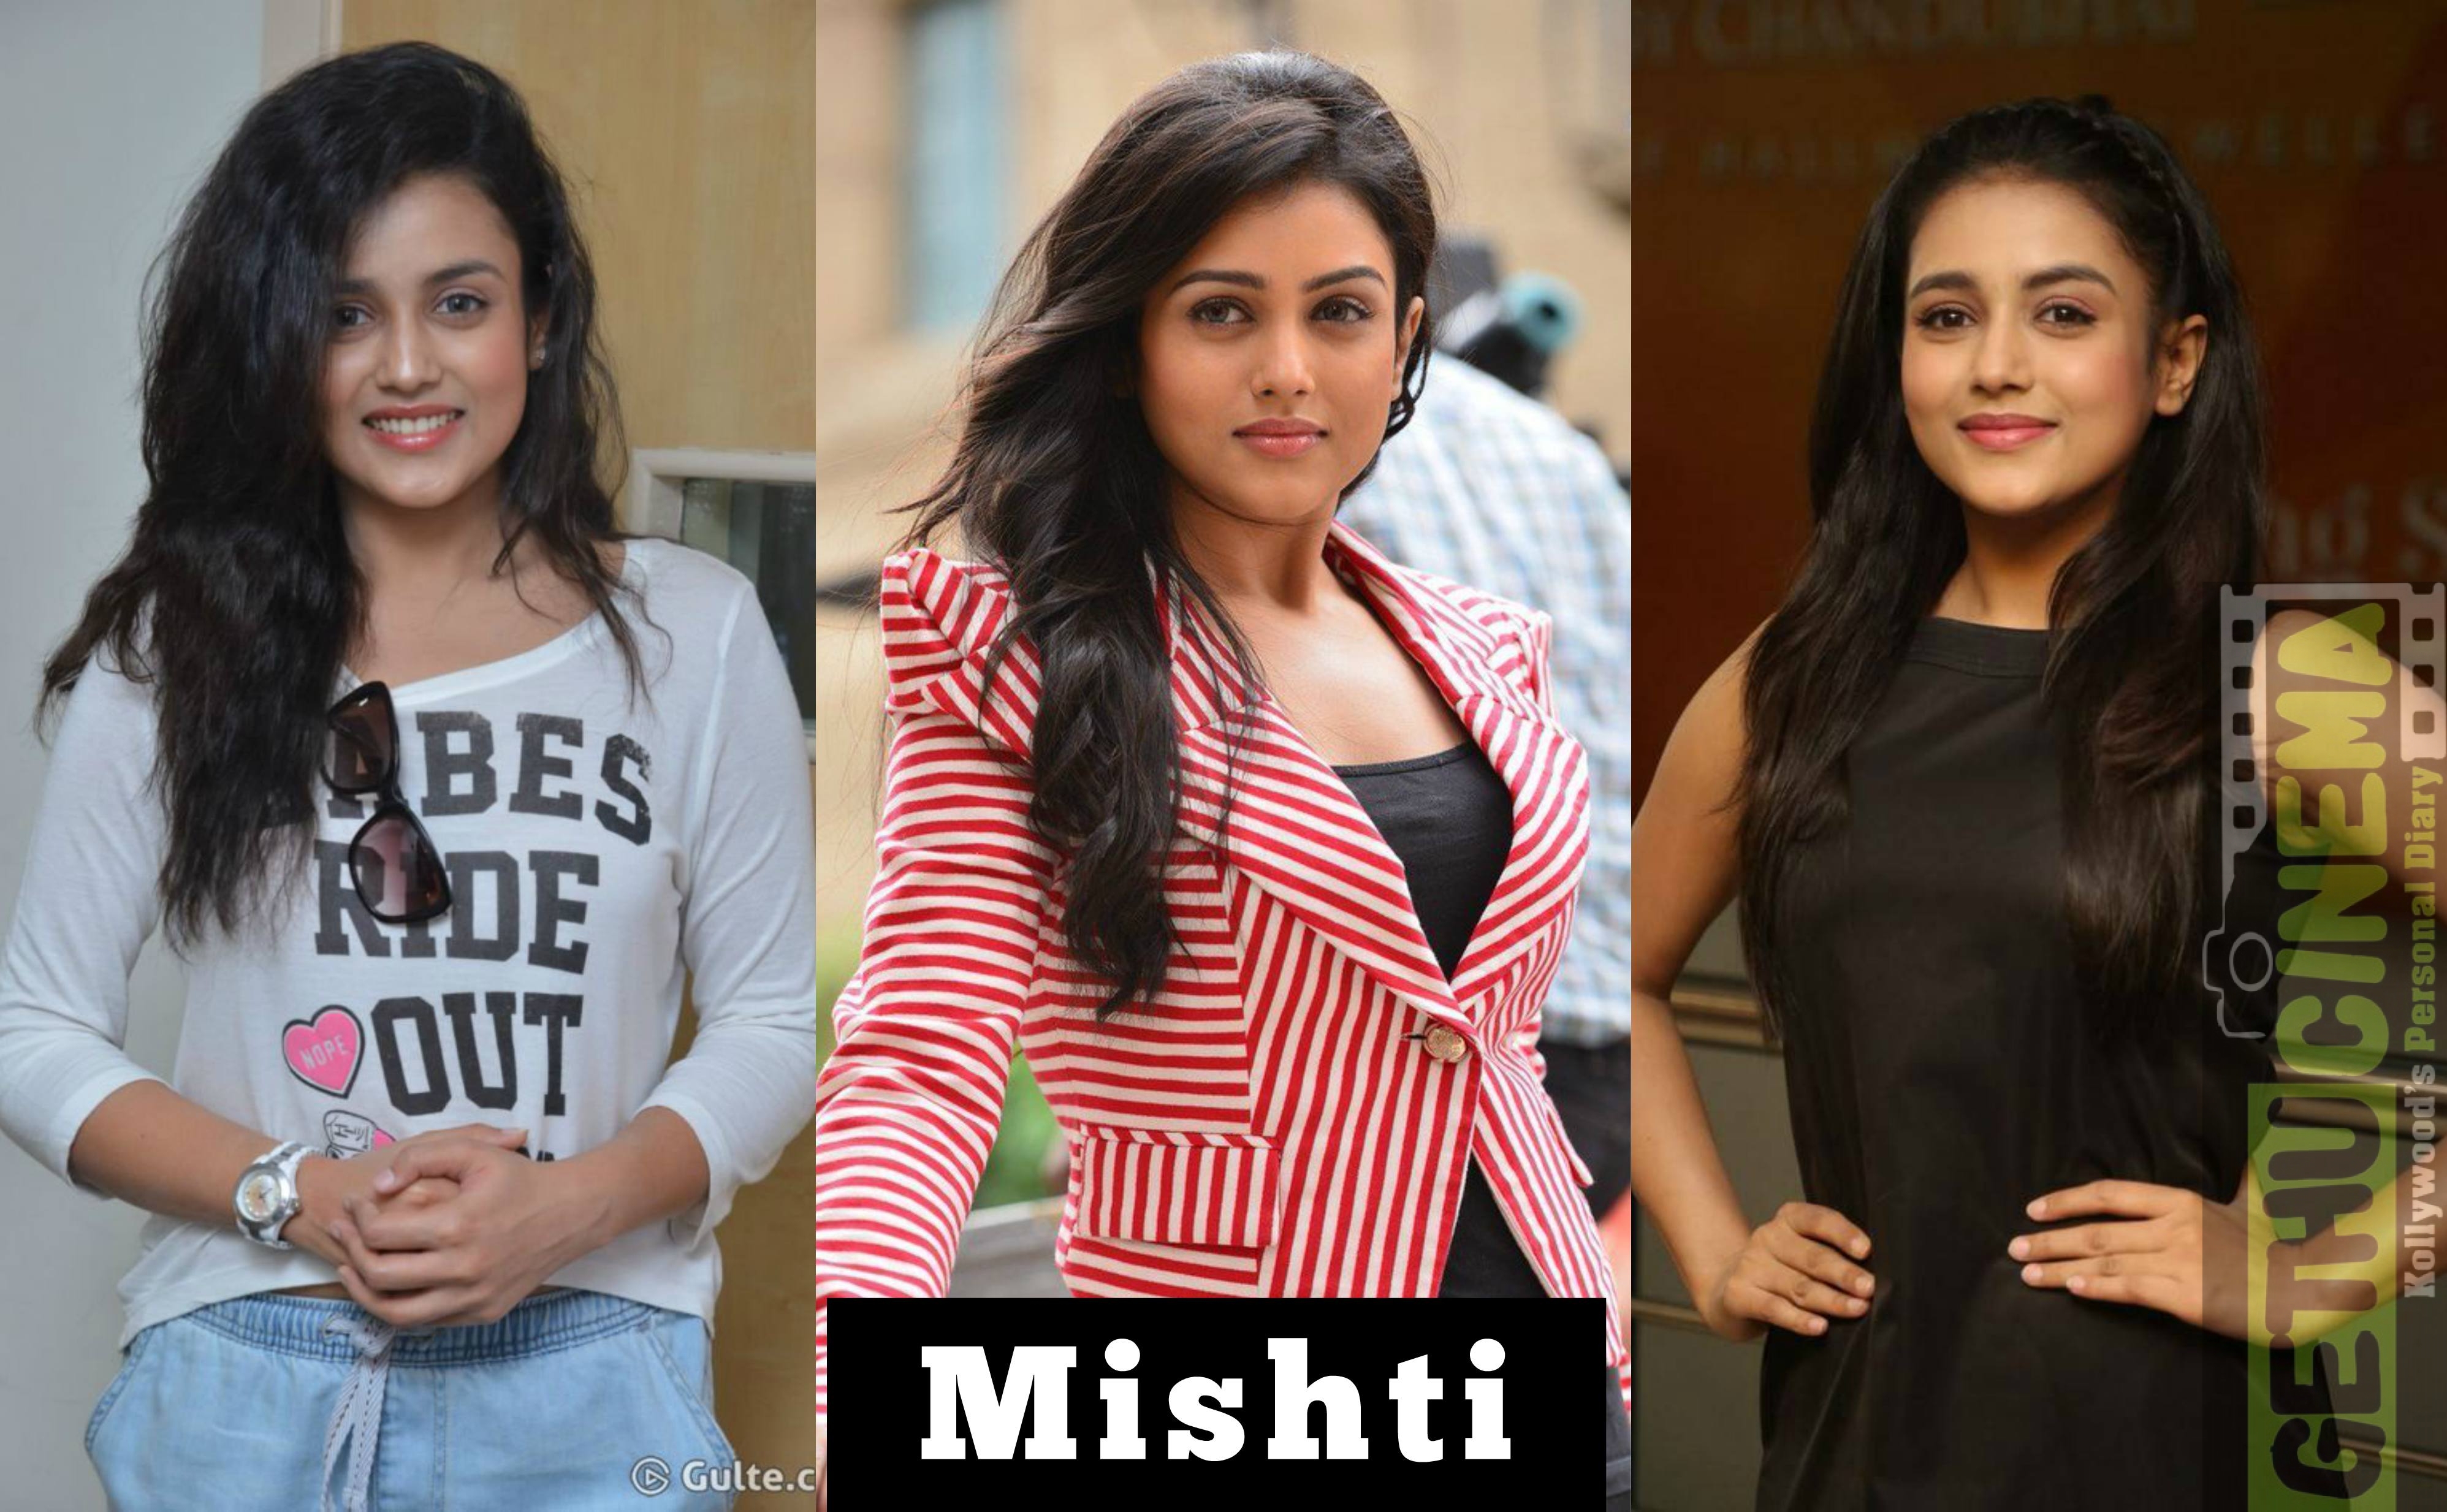 Actress Mishti Wiki Biography Age News Gallery Videos More Home mishti chakraborty mishti chakraborty in comedy nights with kapil mishti chakraborty father mishti chakraborty in comedy nights with kapil mishti (born indrani chakraborty in west bengal, india)is an indian film actress.she made her bollywood debut with subhash ghai's film kaanchi: actress mishti wiki biography age